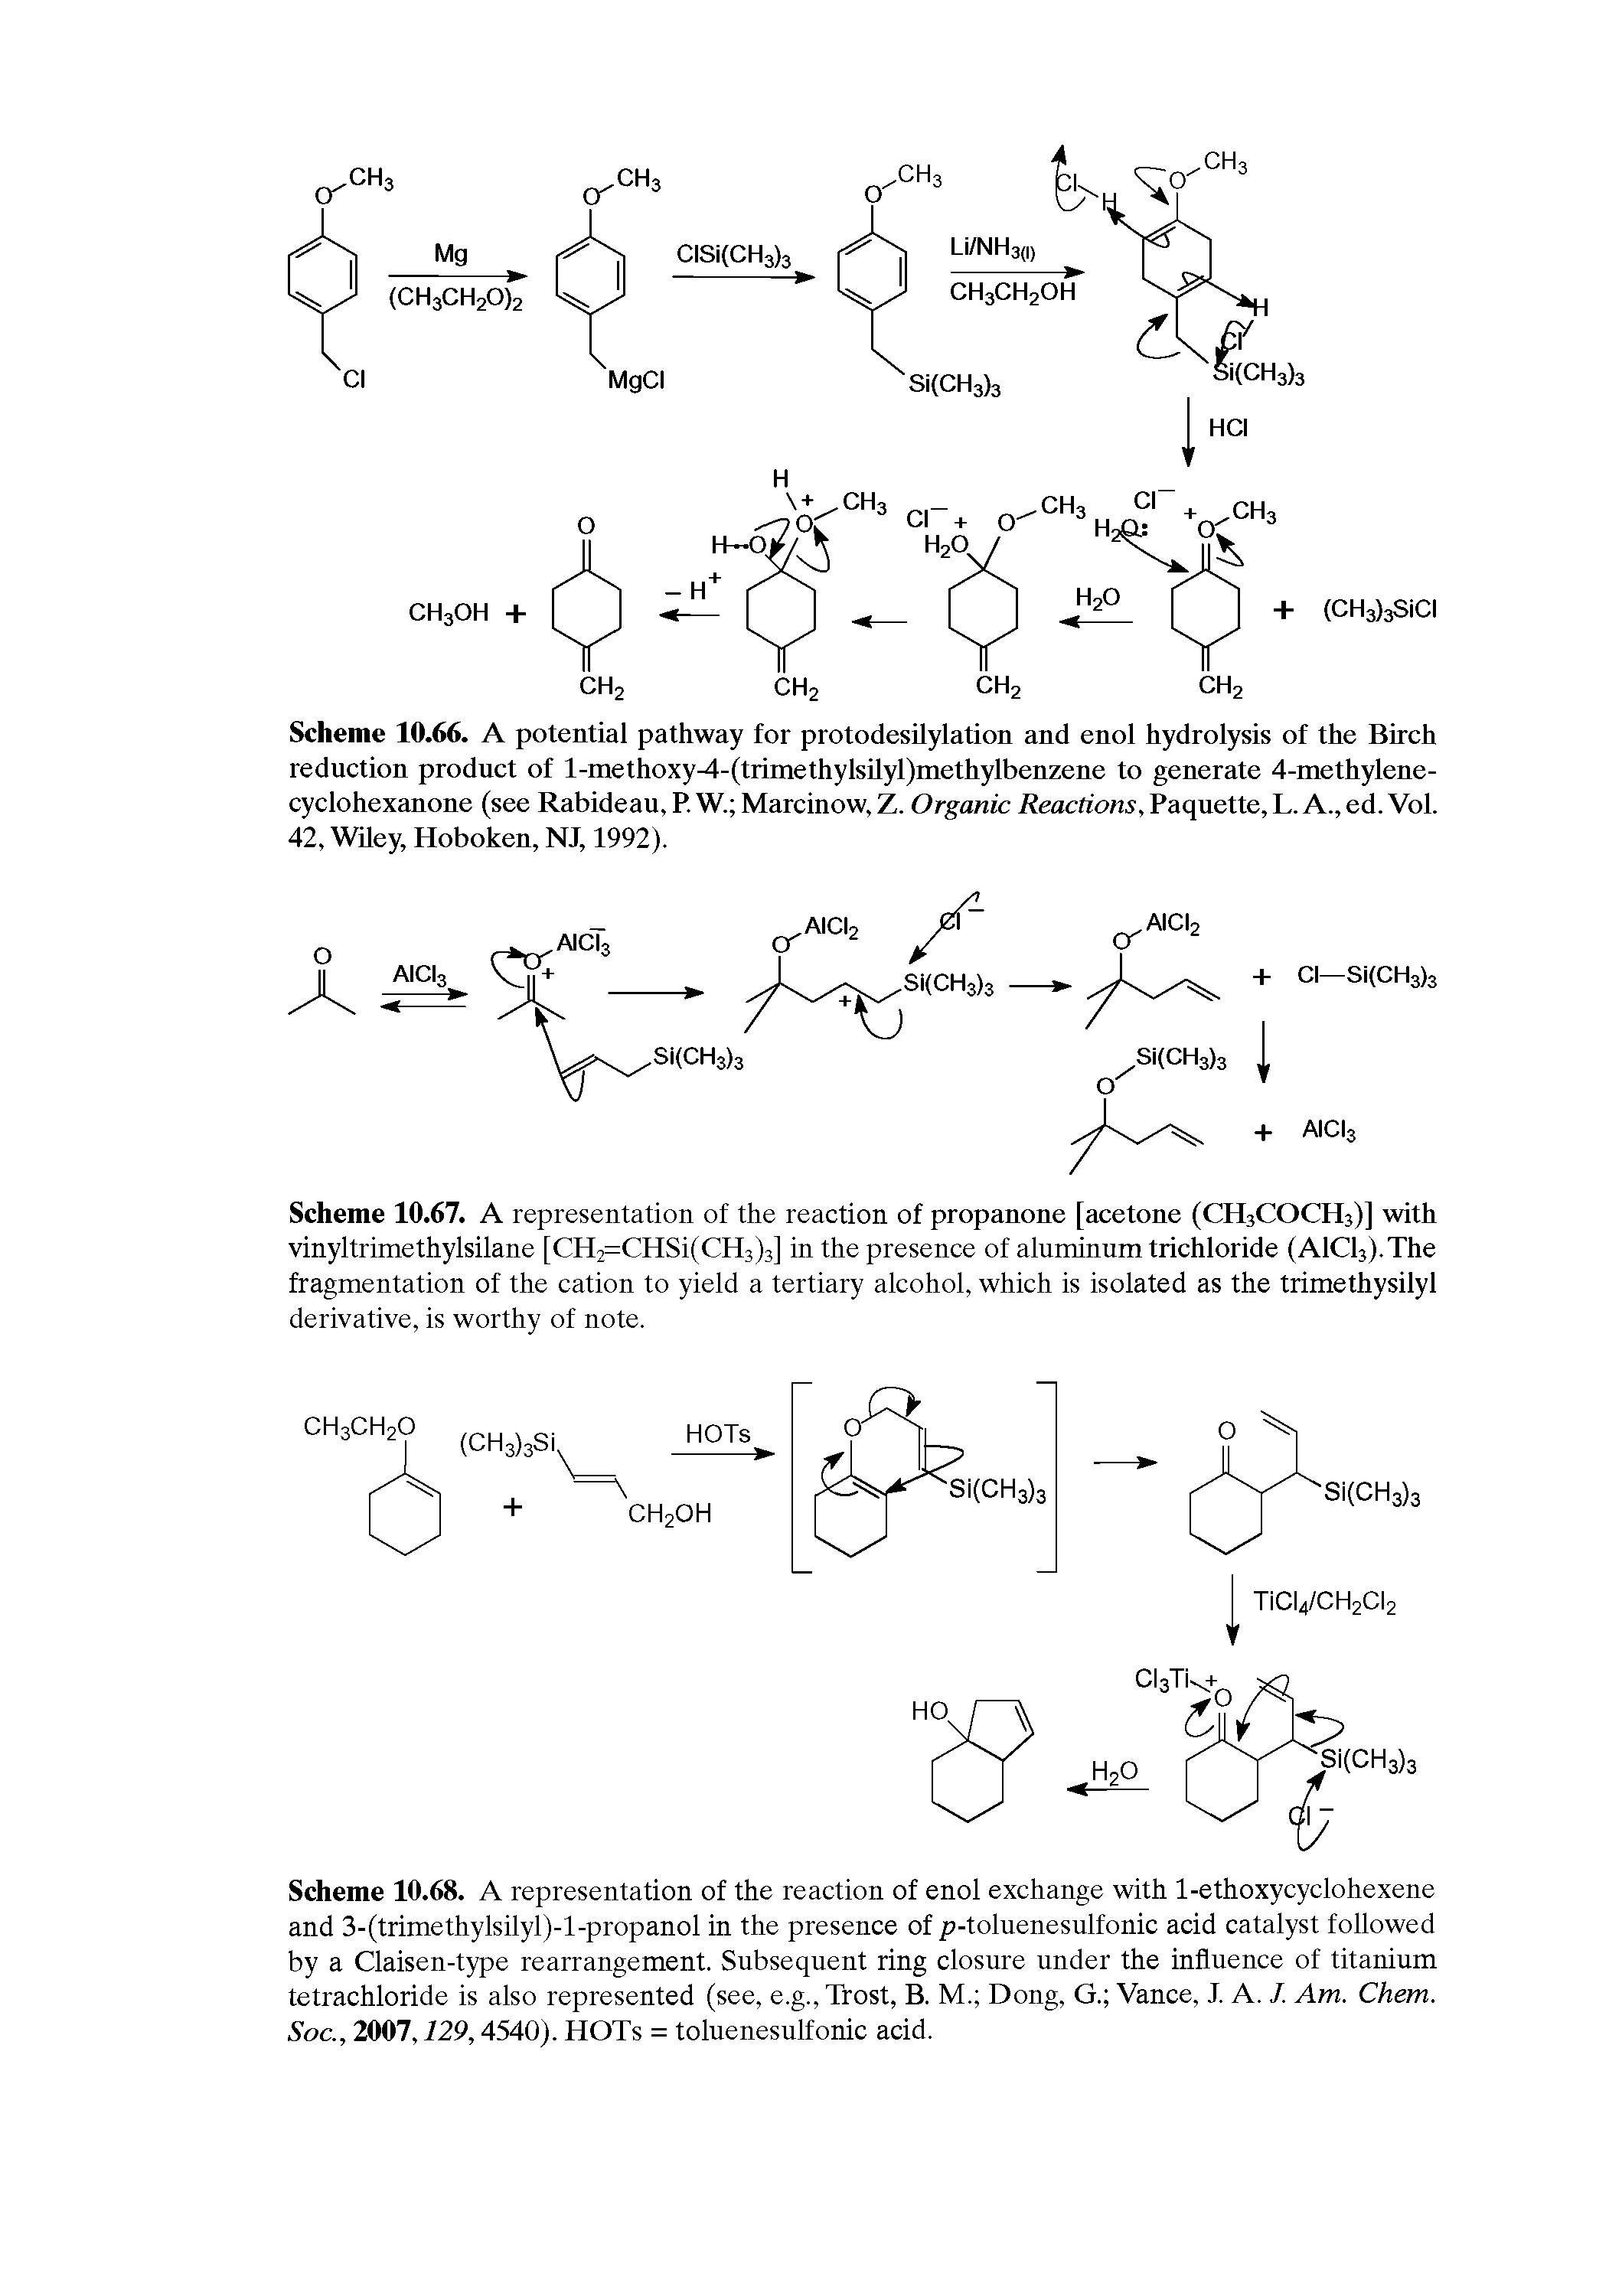 Scheme 10.66. A potential pathway for protodesilylation and enol hydrolysis of the Birch reduction product of l-methoxy-4-(trimethylsilyl)methylbenzene to generate 4-methylene-cyclohexanone (see Rabideau, P. W. Marcinow, Z. Organic Reactions, Paquette, L. A., ed. Vol. 42, Wiley, Hoboken, NJ, 1992).